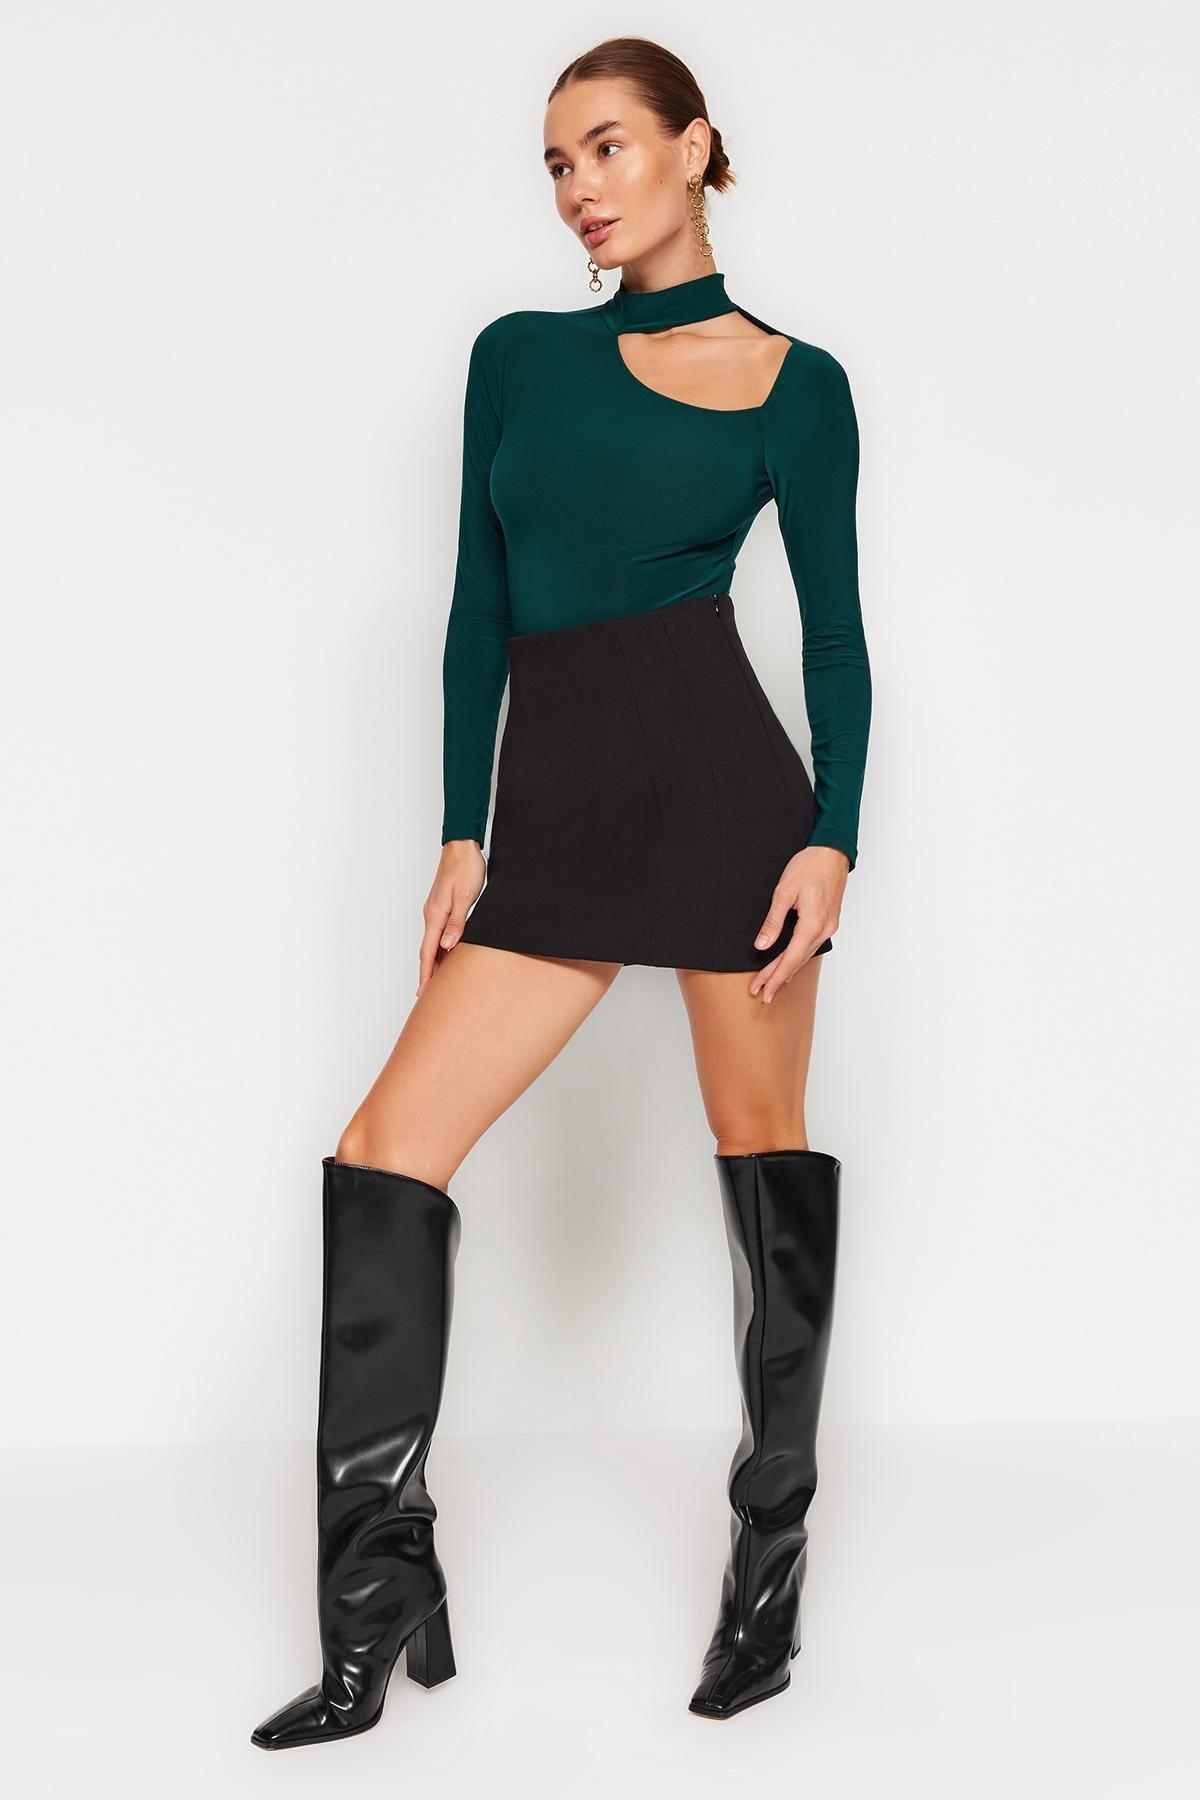 Trendyol - Green Cut-Out Choker Collar Knitted Body